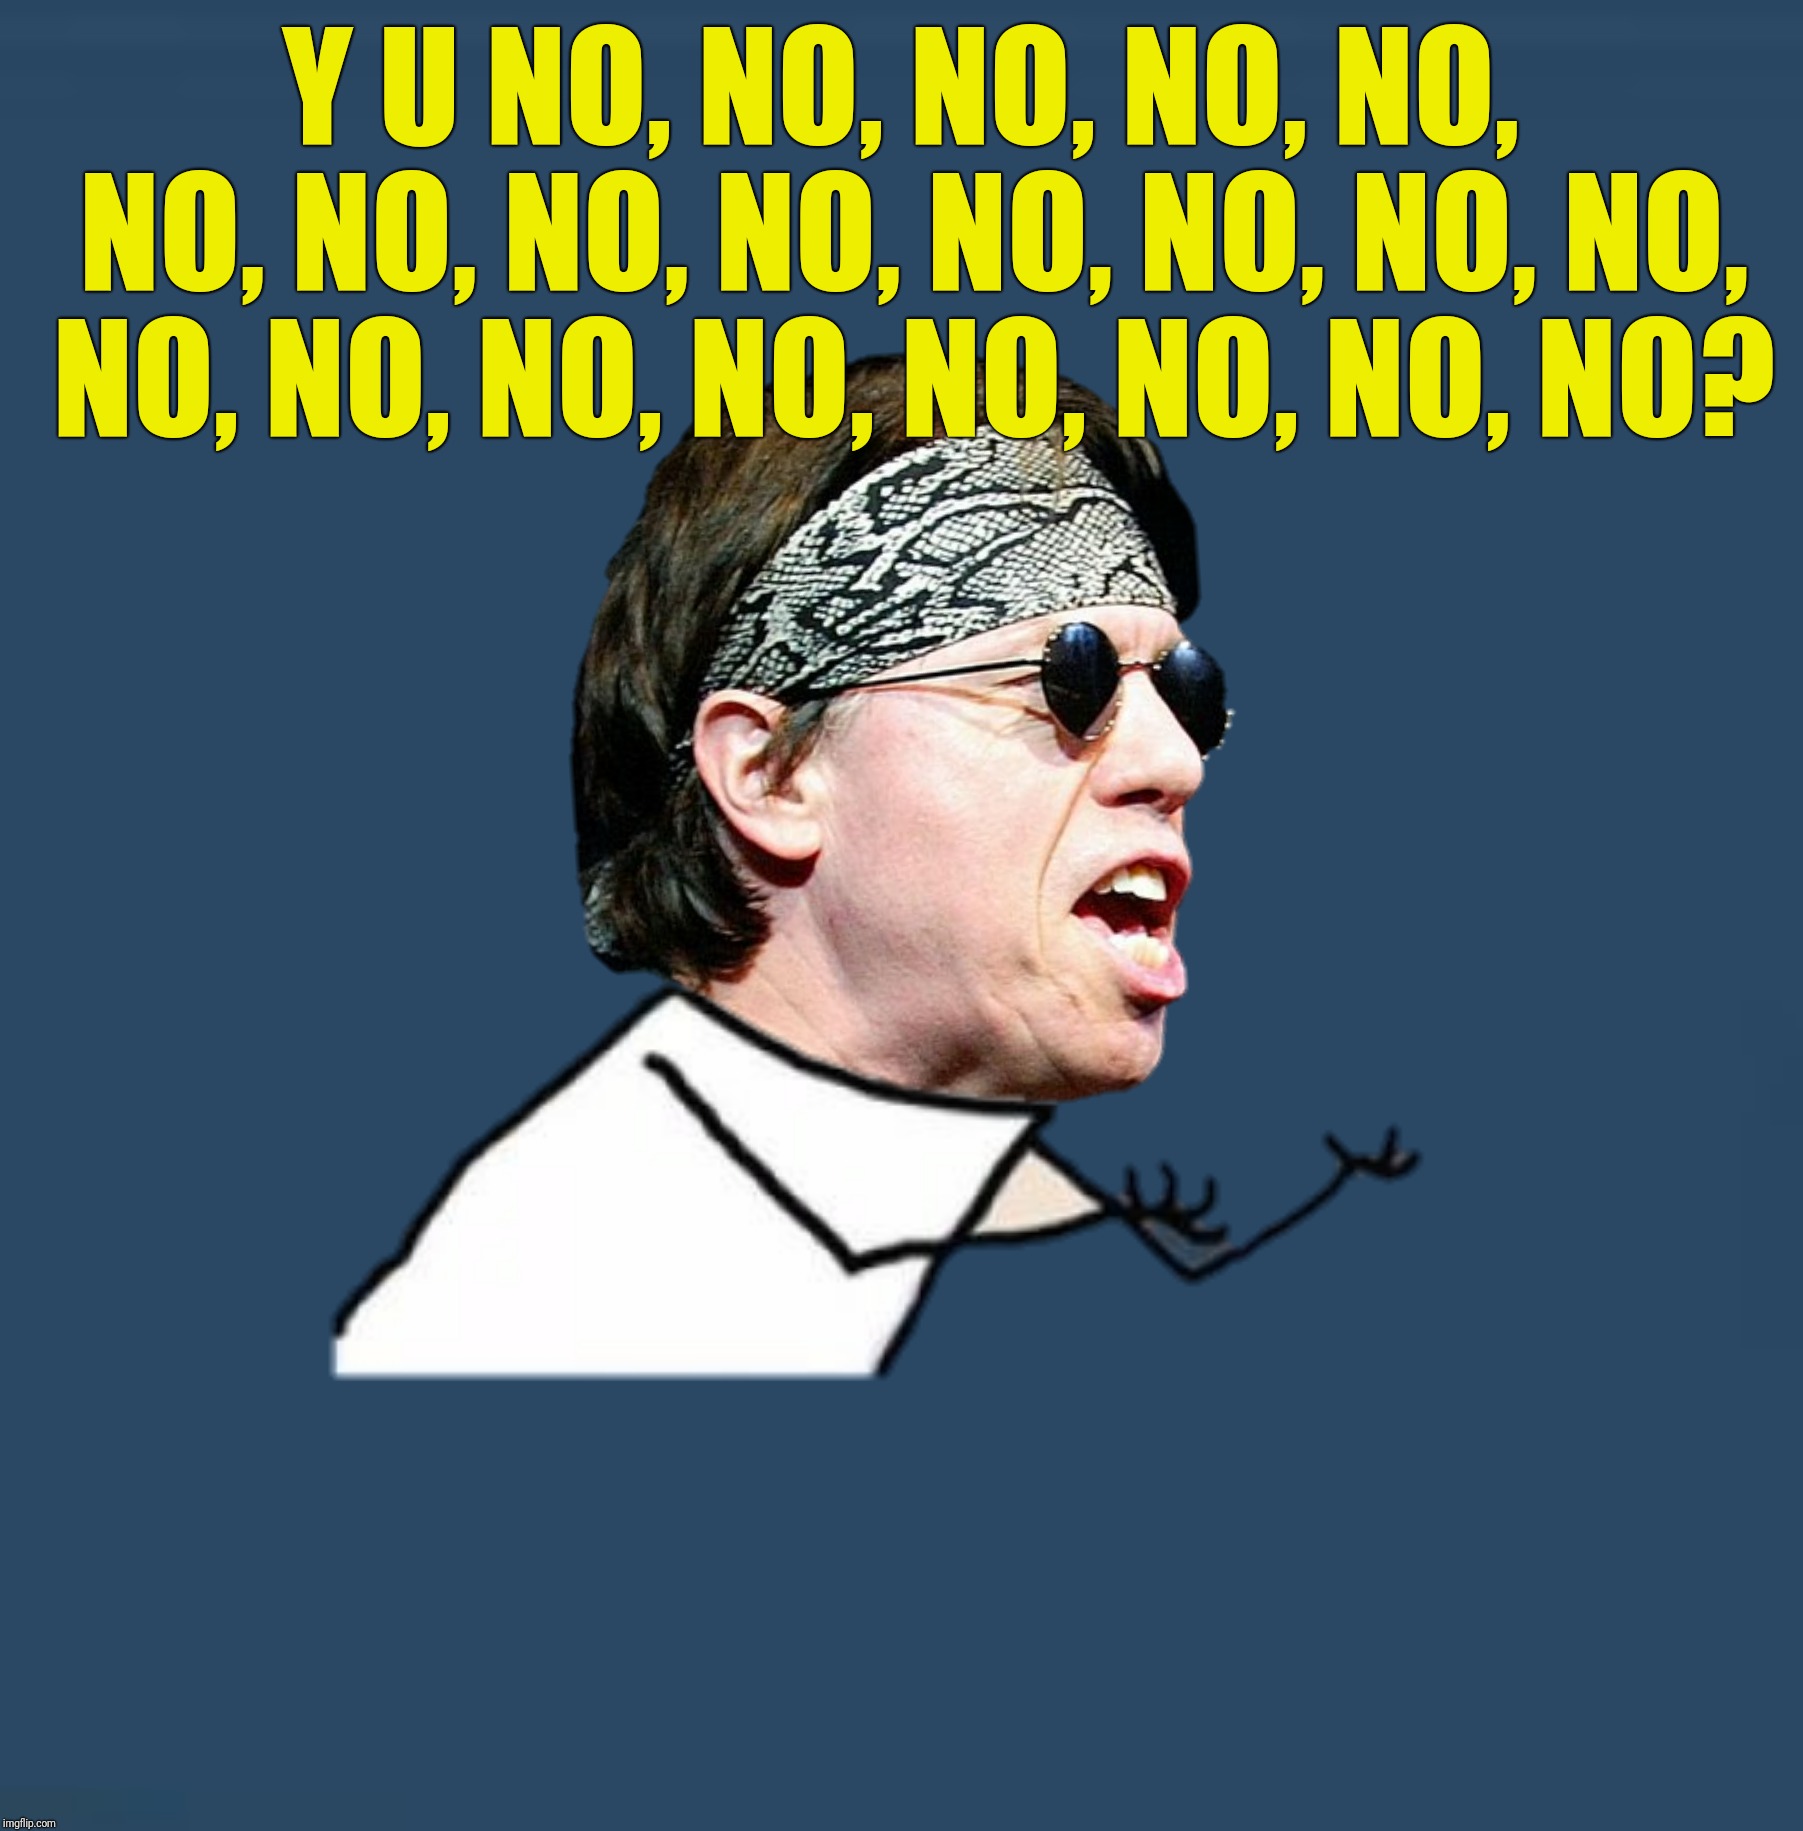 Nobody but me.  Y U NOvember, a socrates and punman21 event |  Y U NO, NO, NO, NO, NO, NO, NO, NO, NO, NO, NO, NO, NO, NO, NO, NO, NO, NO, NO, NO, NO? | image tagged in george thorogood,y u november,nobody but me,y u no guy | made w/ Imgflip meme maker